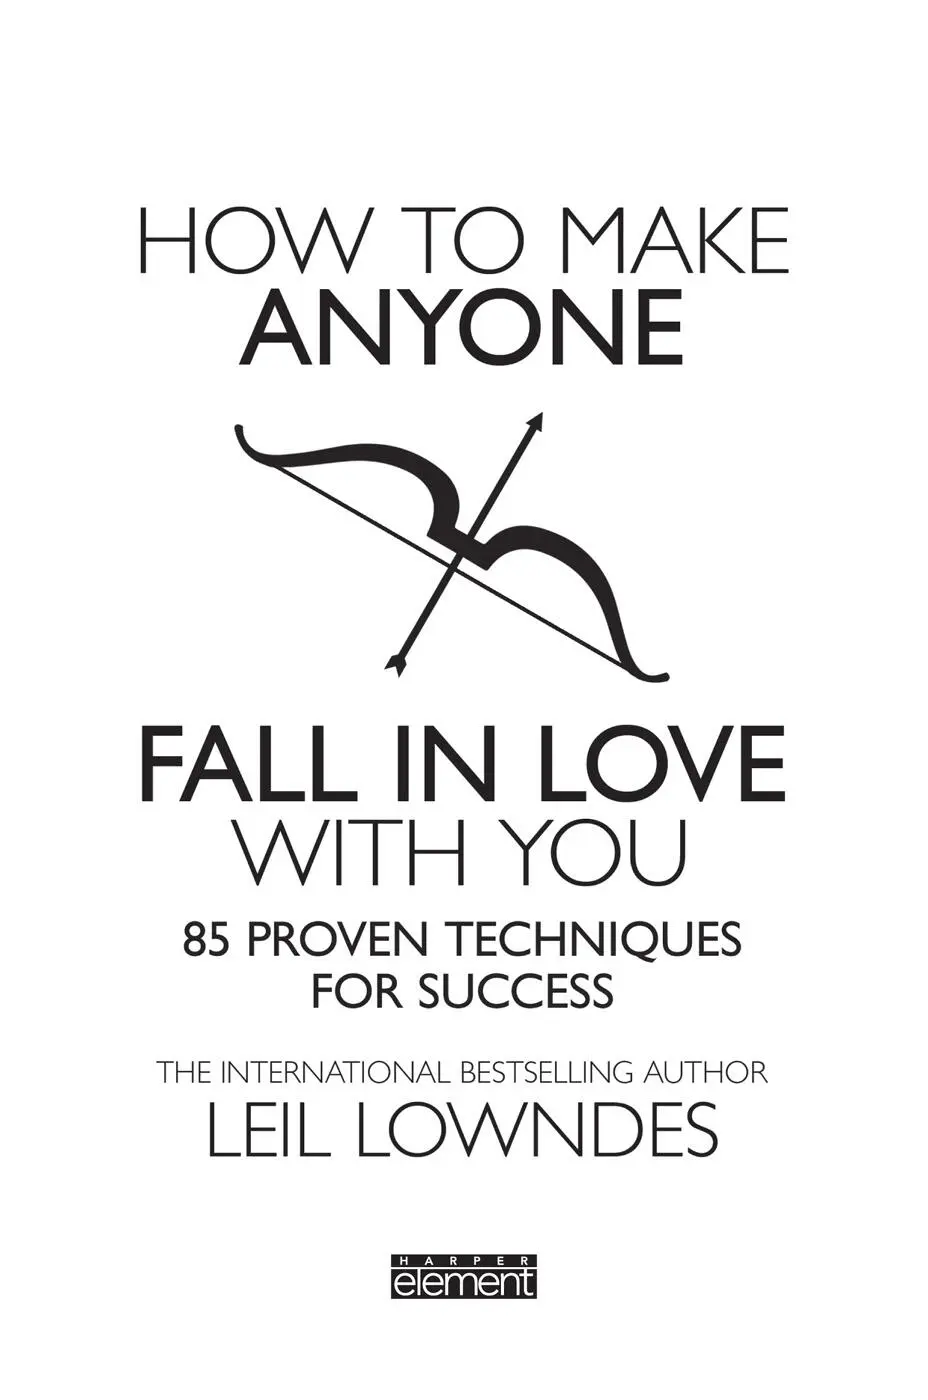 To fulfil the promise of the title How to Make Anyone Fall in Love with You - фото 1